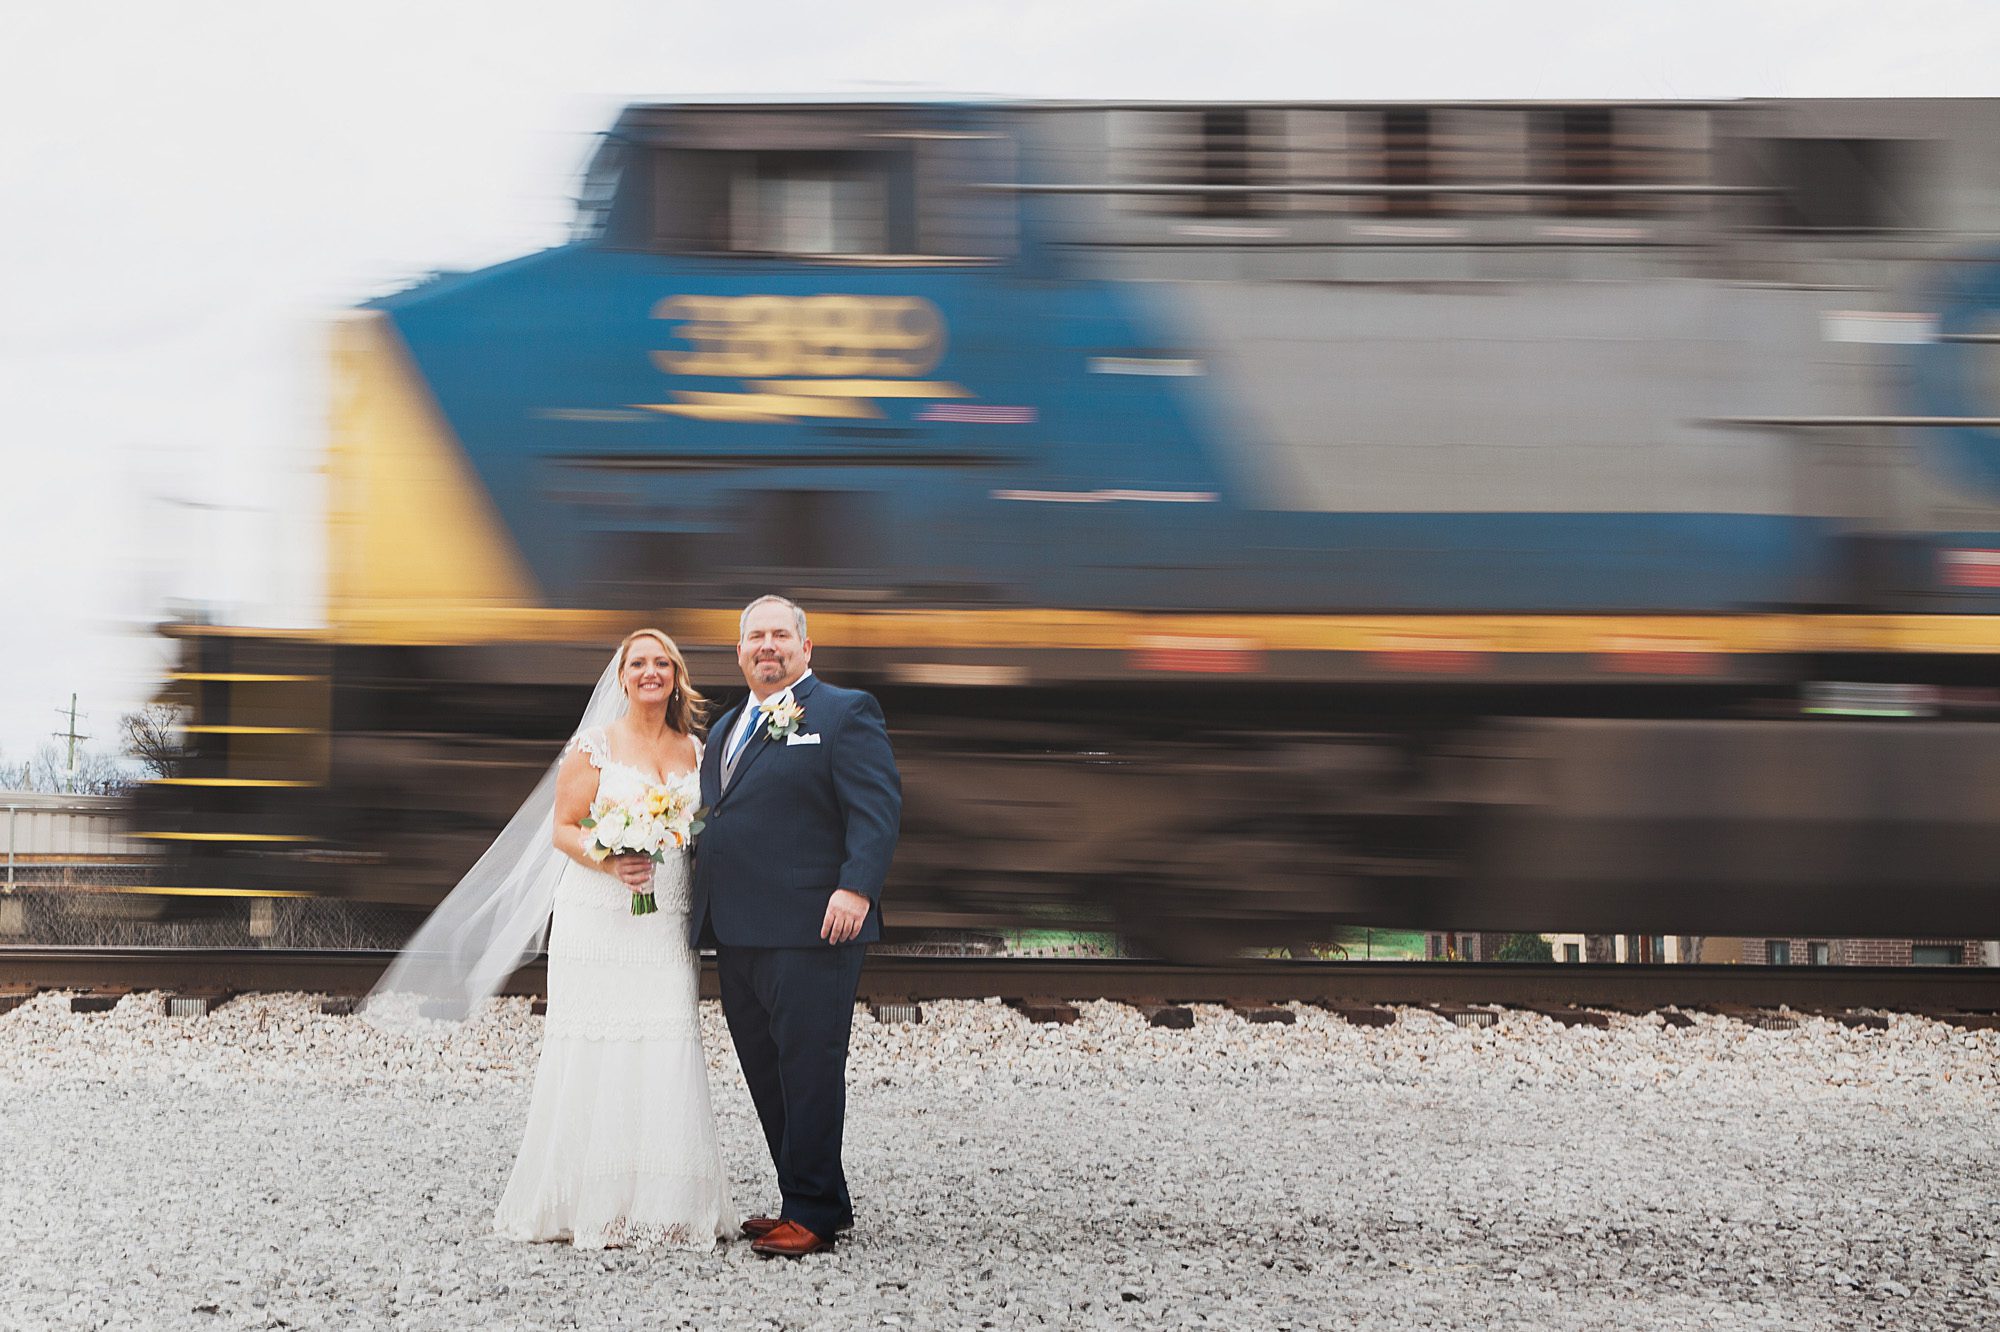 Bride and groom portrait with speeding train in background before wedding ceremony  at Houston Station, Nashville TN. Photos by Krista Lee Photography.